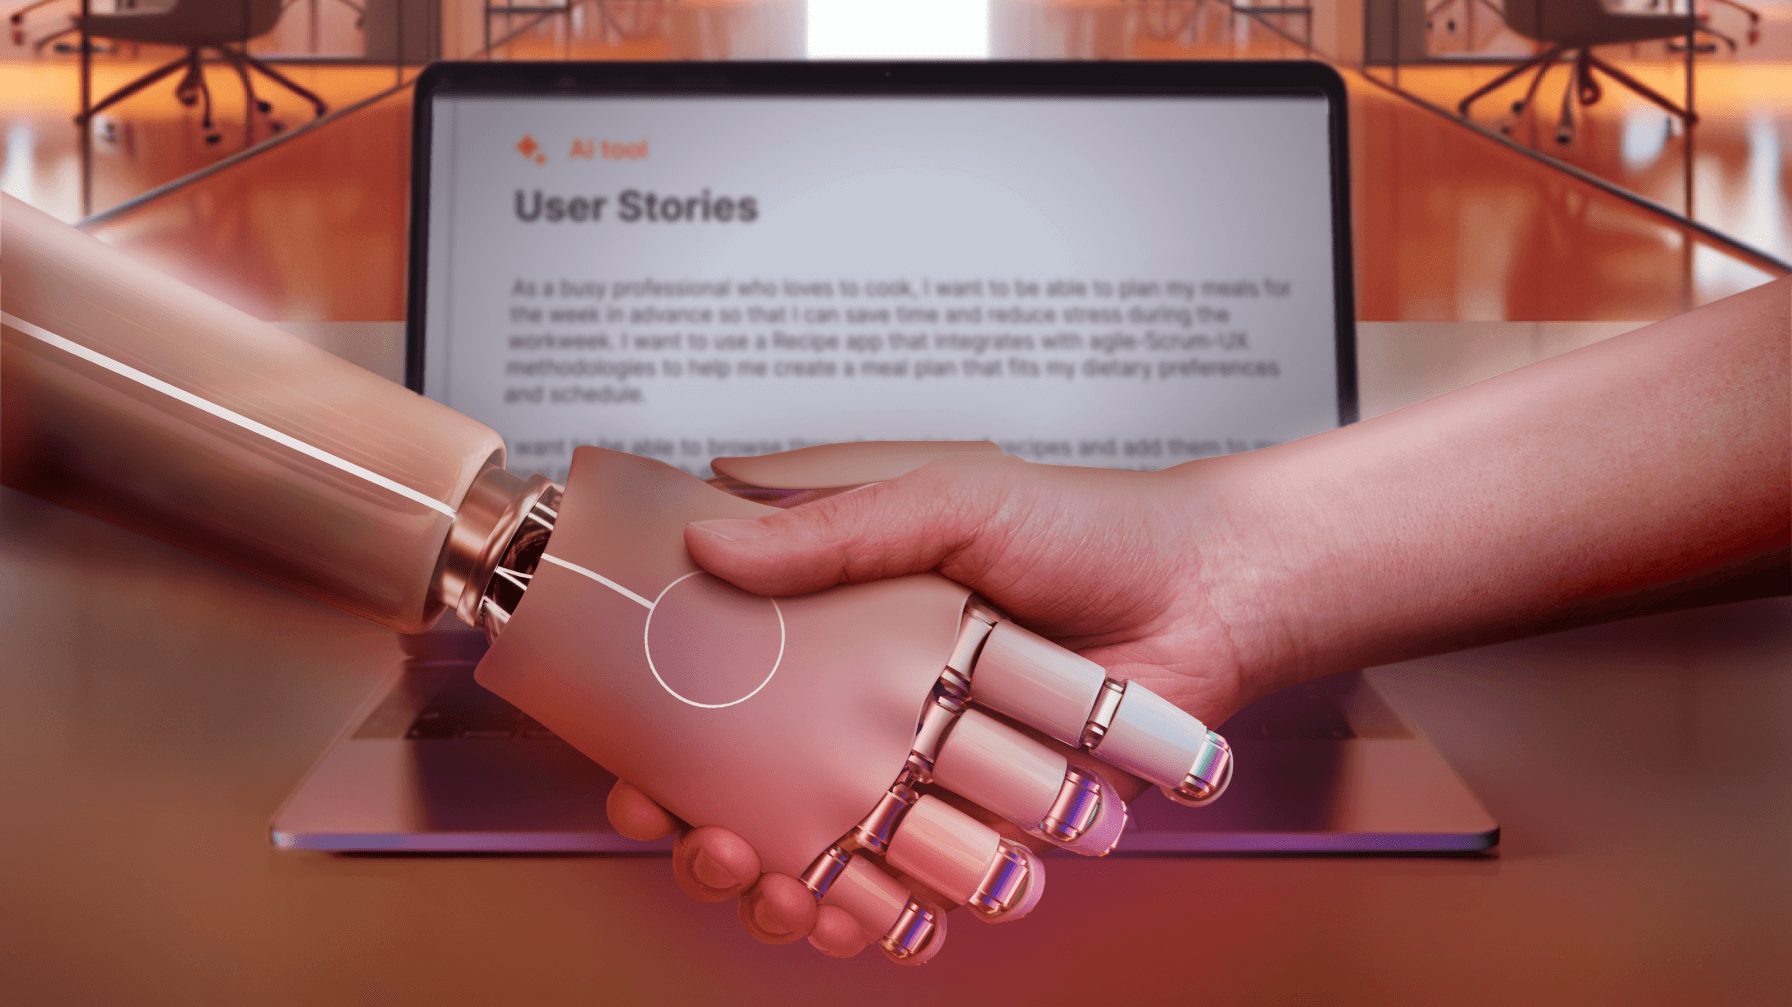 Human shakes hand with robot in front of computer that displays example of a user story from software development